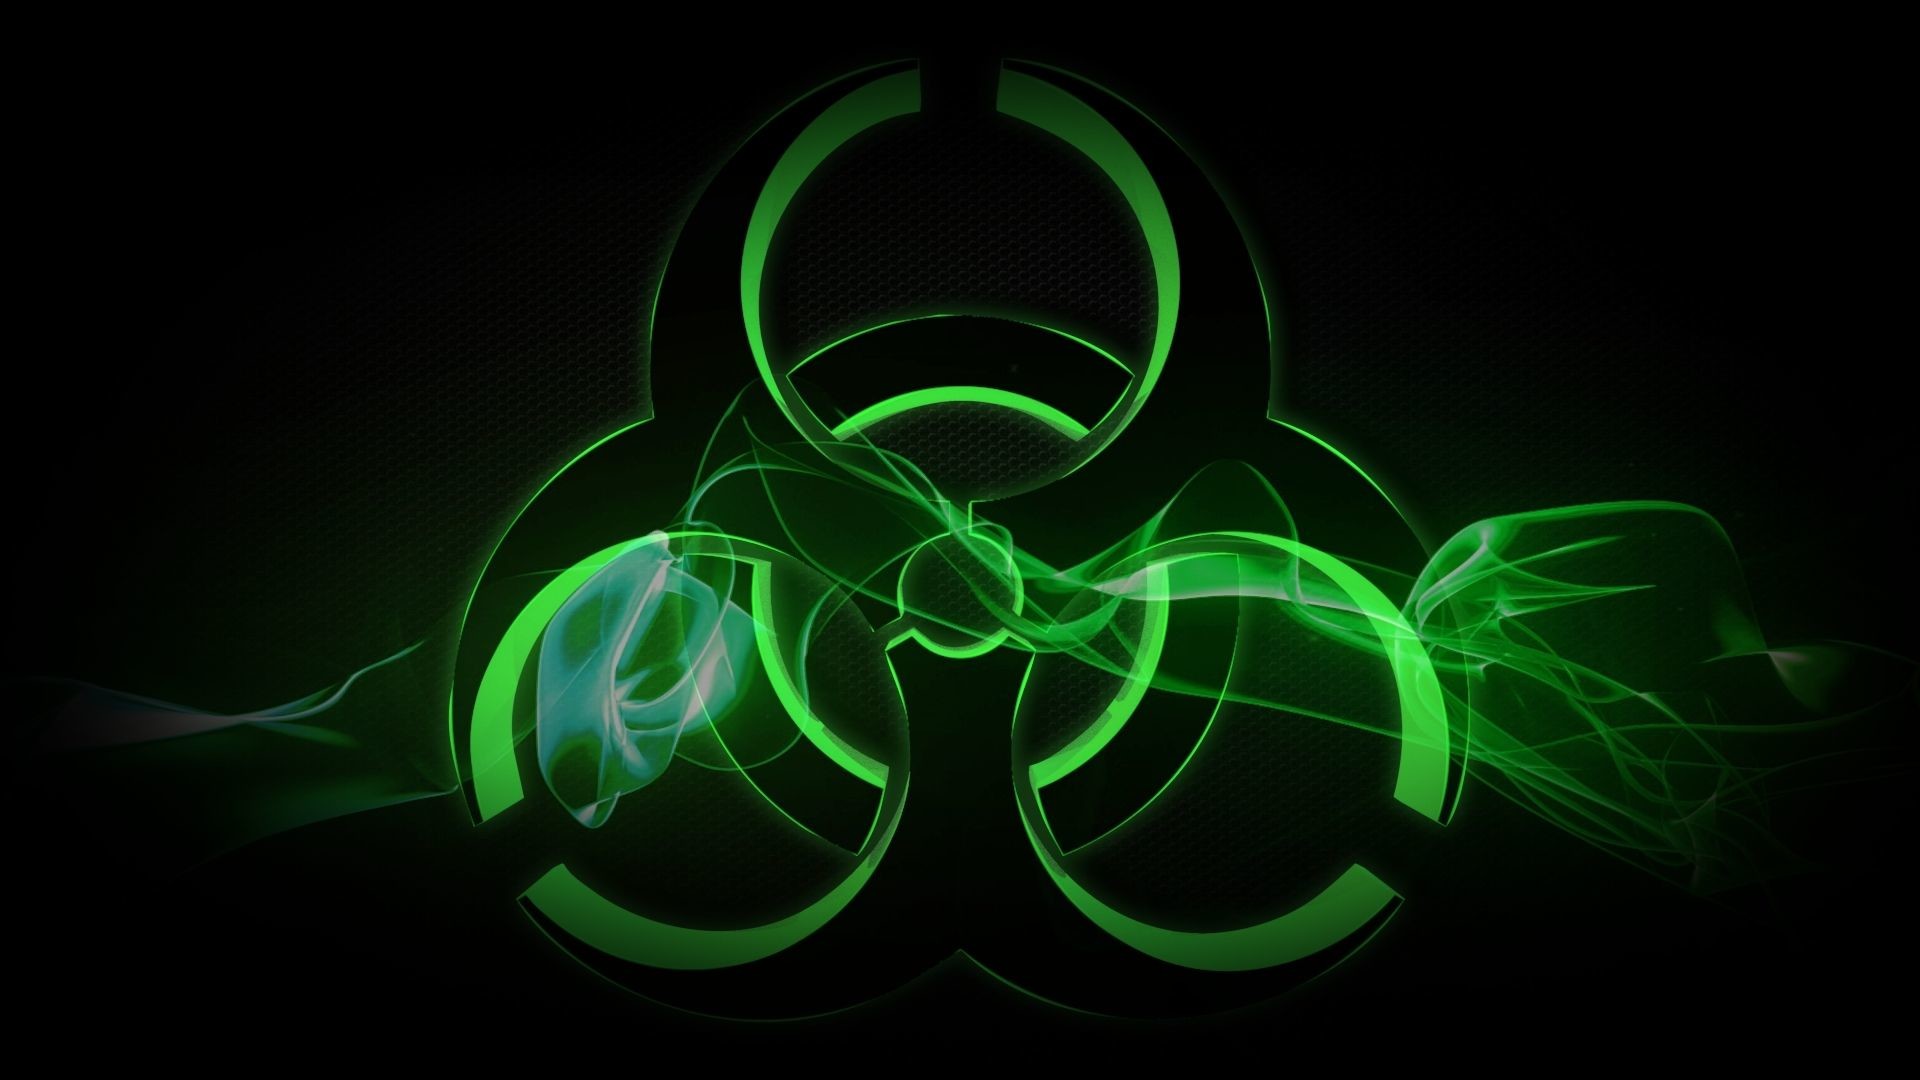 Cool Hd Wallpapers Toxic Sign Photo 5 Radioactive Cool Hd Wallpapers Toxic 1920x1080